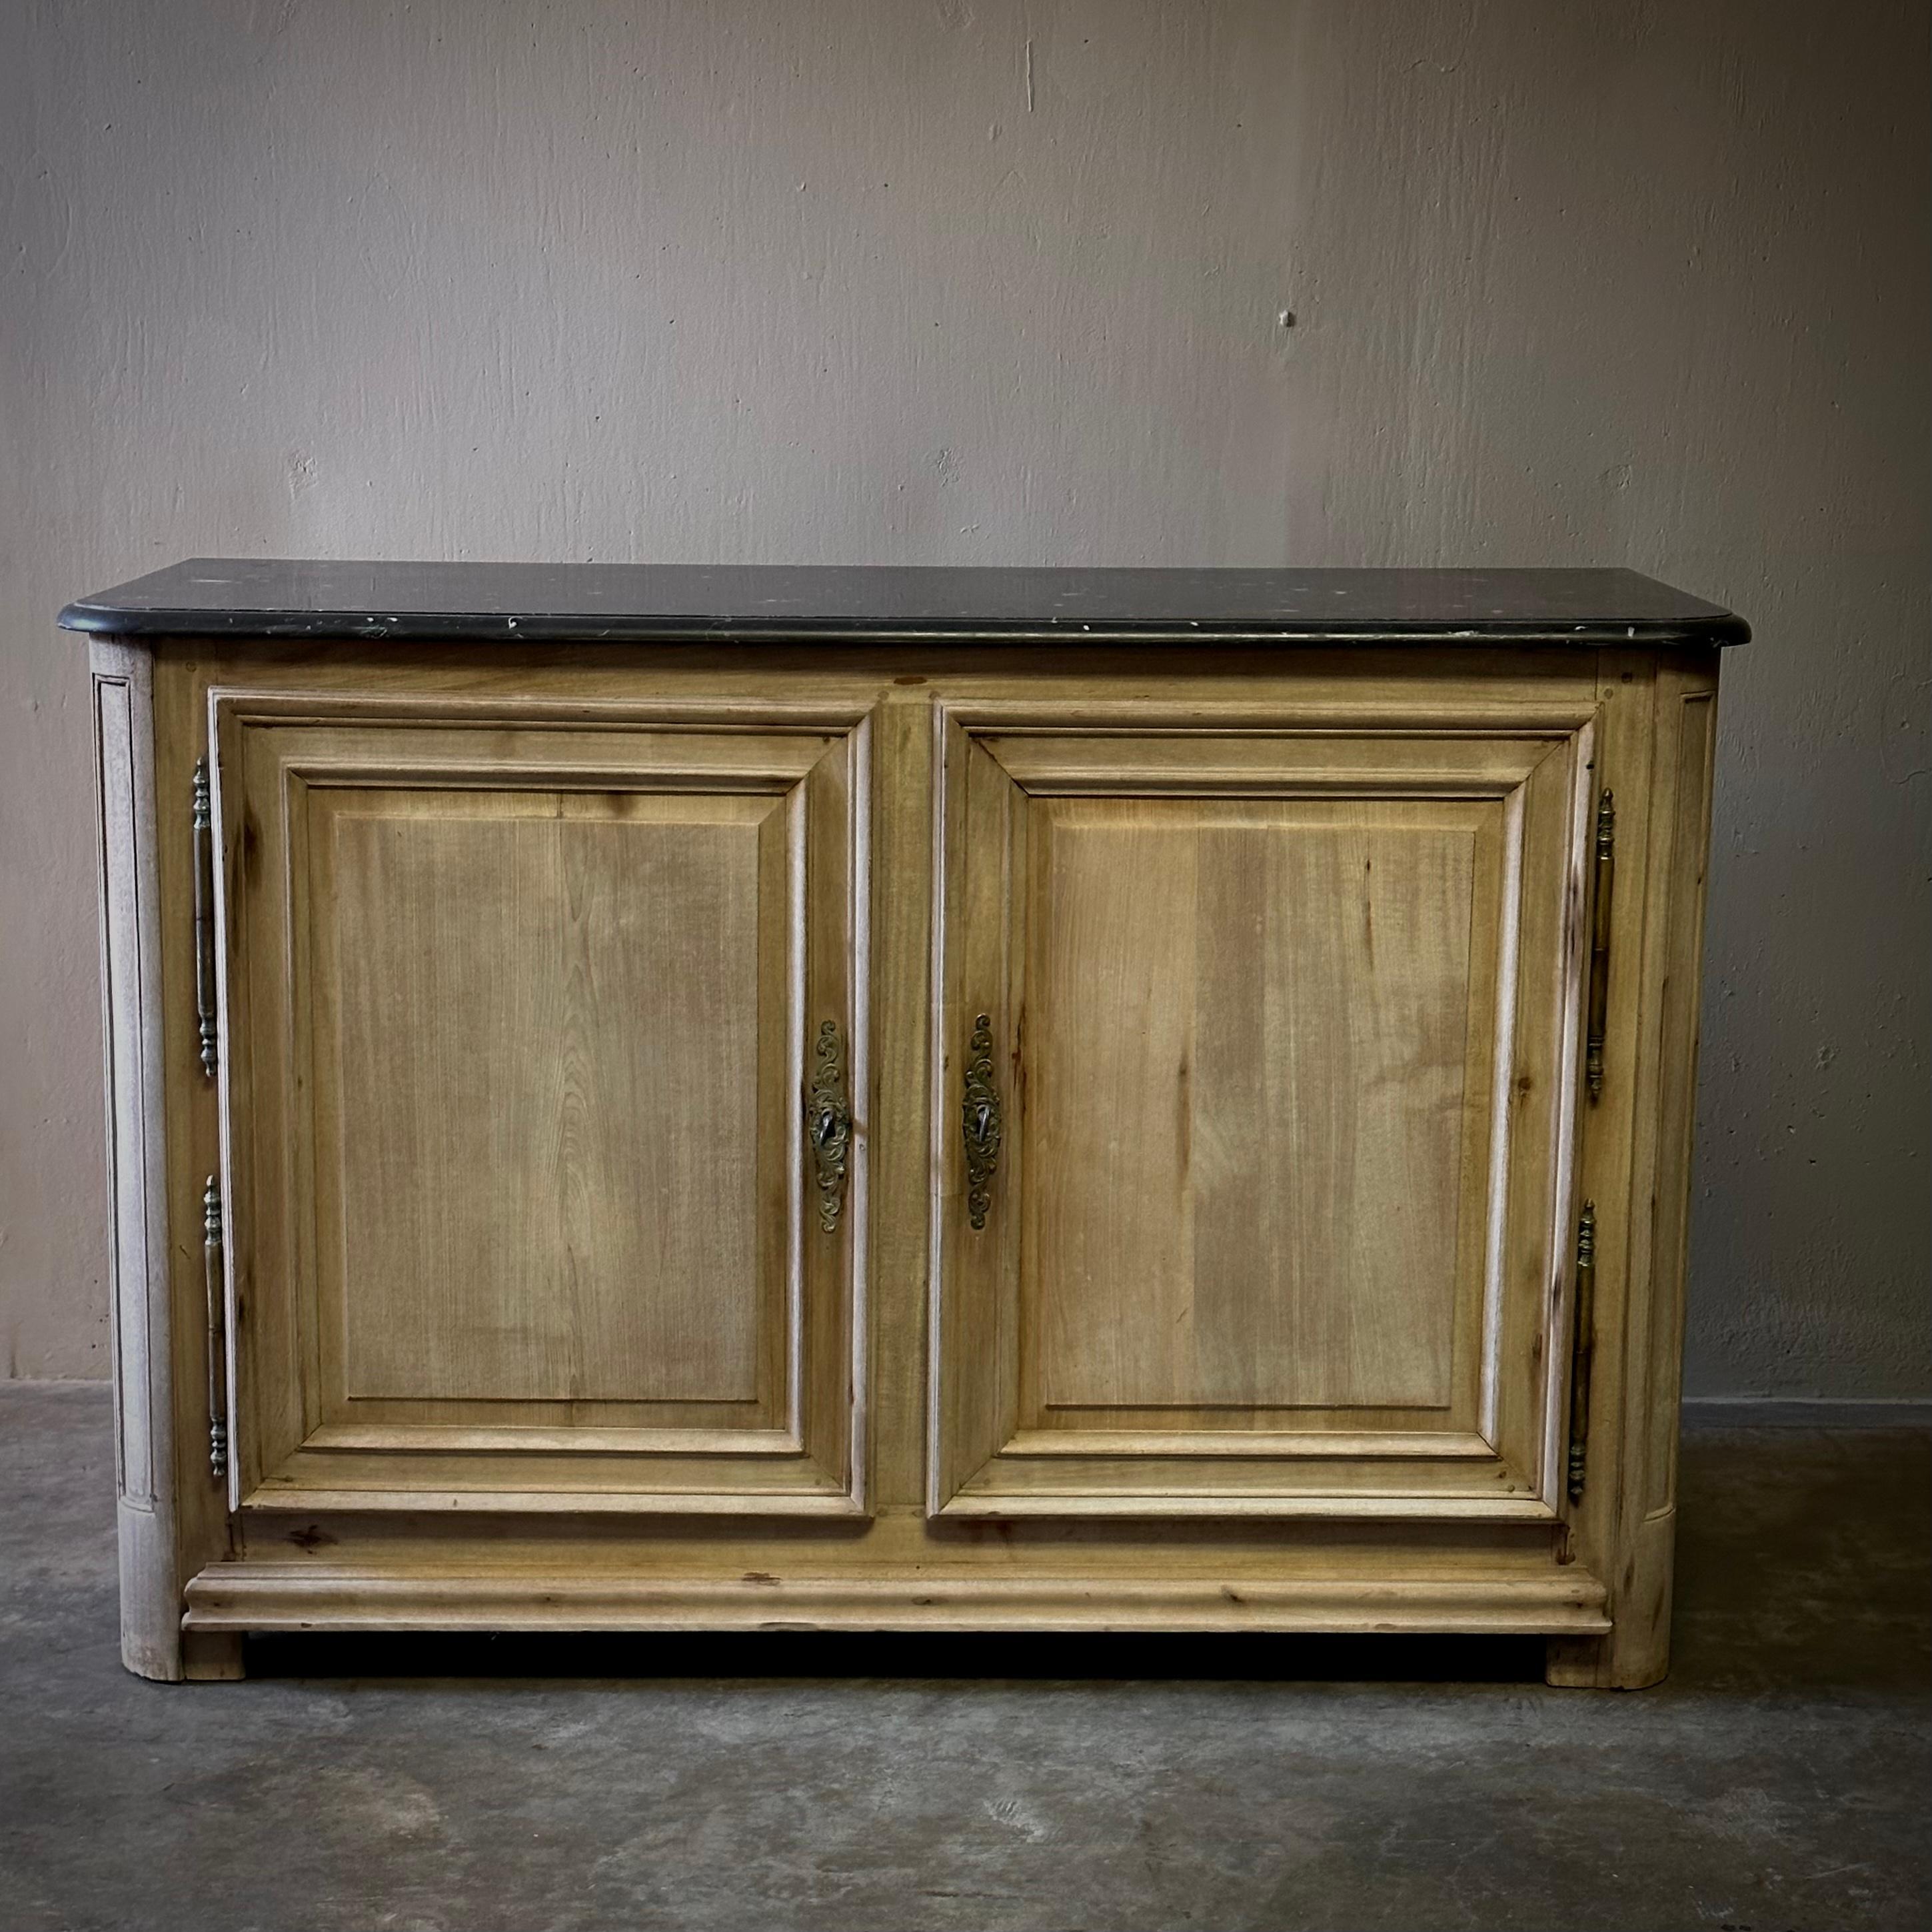 French 18th century bleached sideboard or cabinet with a wonderful dusky gray tone and simple, traditional lines. Rustic elegance at its finest. 

France, circa 1760

Dimensions: 47.2W x 19.3D x 32.3H